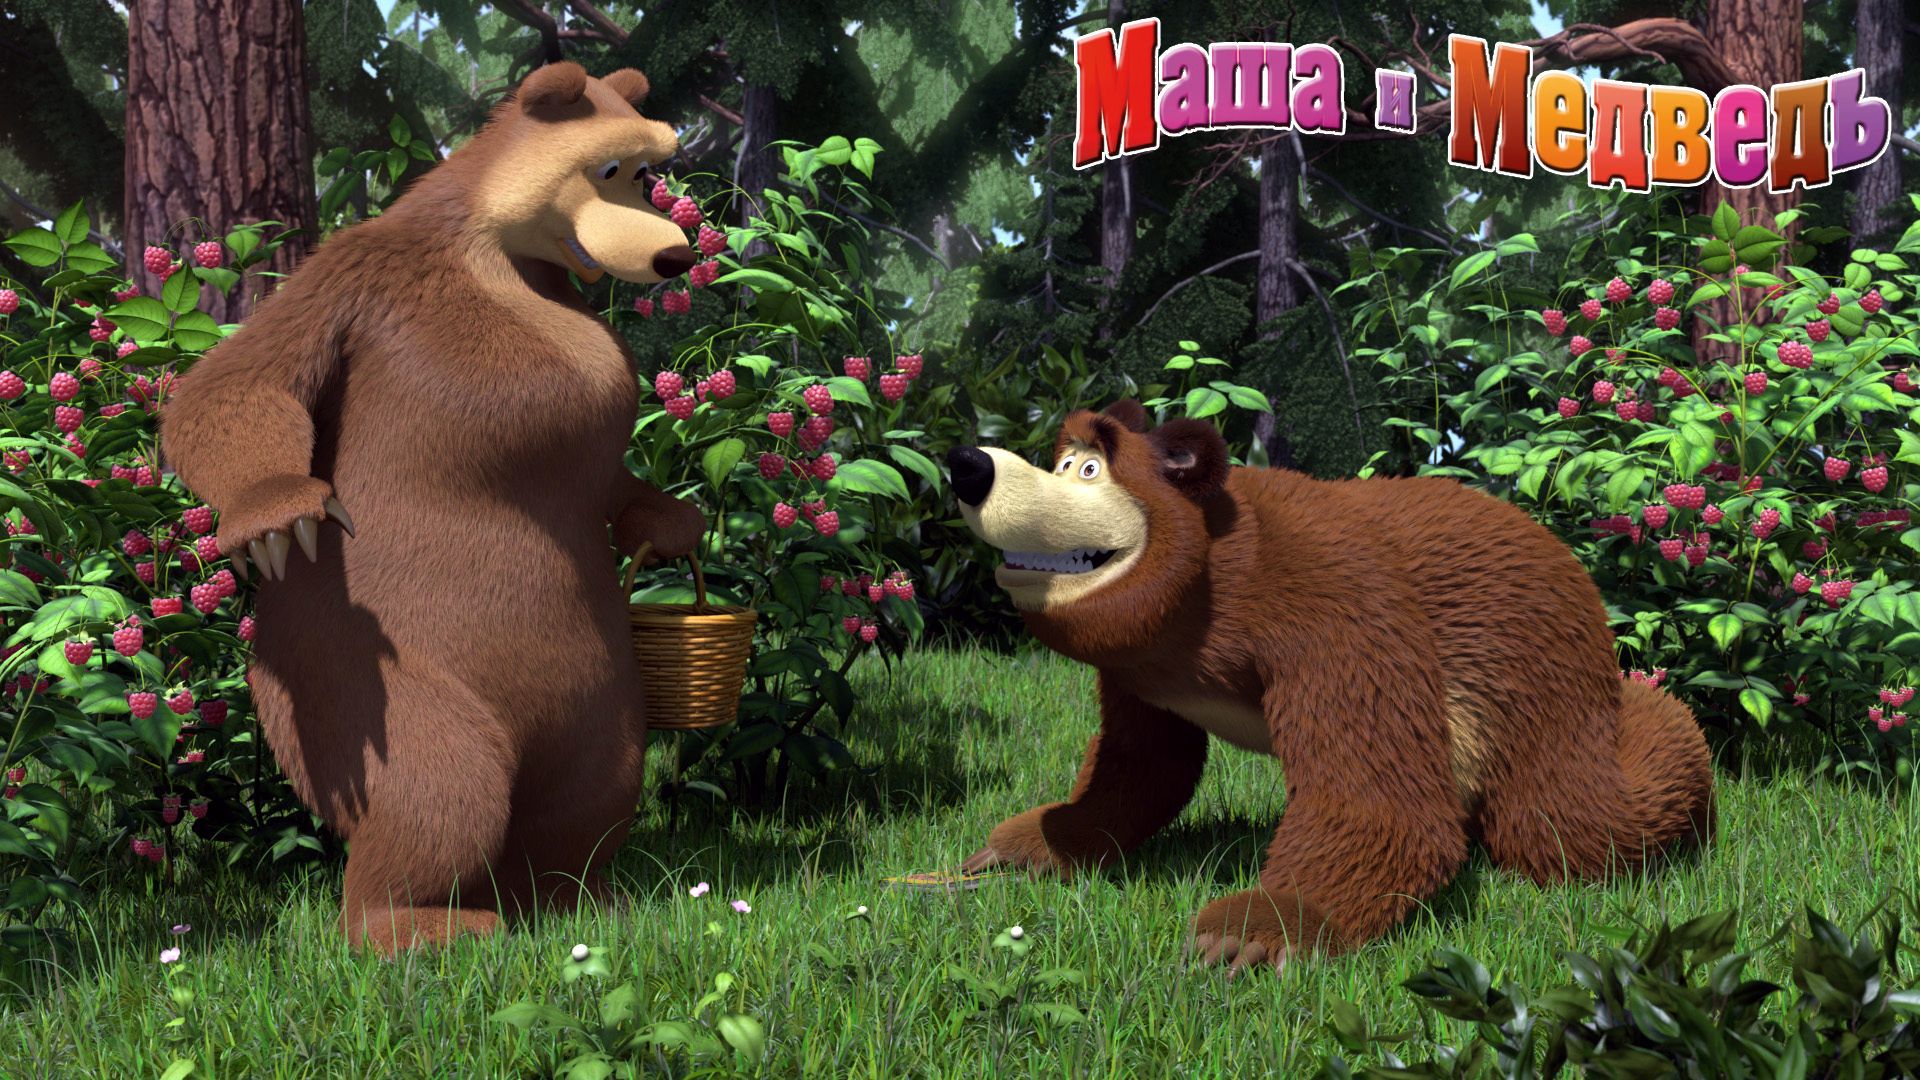 bears, cartoon Masha and the Bear wallpapers and images  wallpapers 